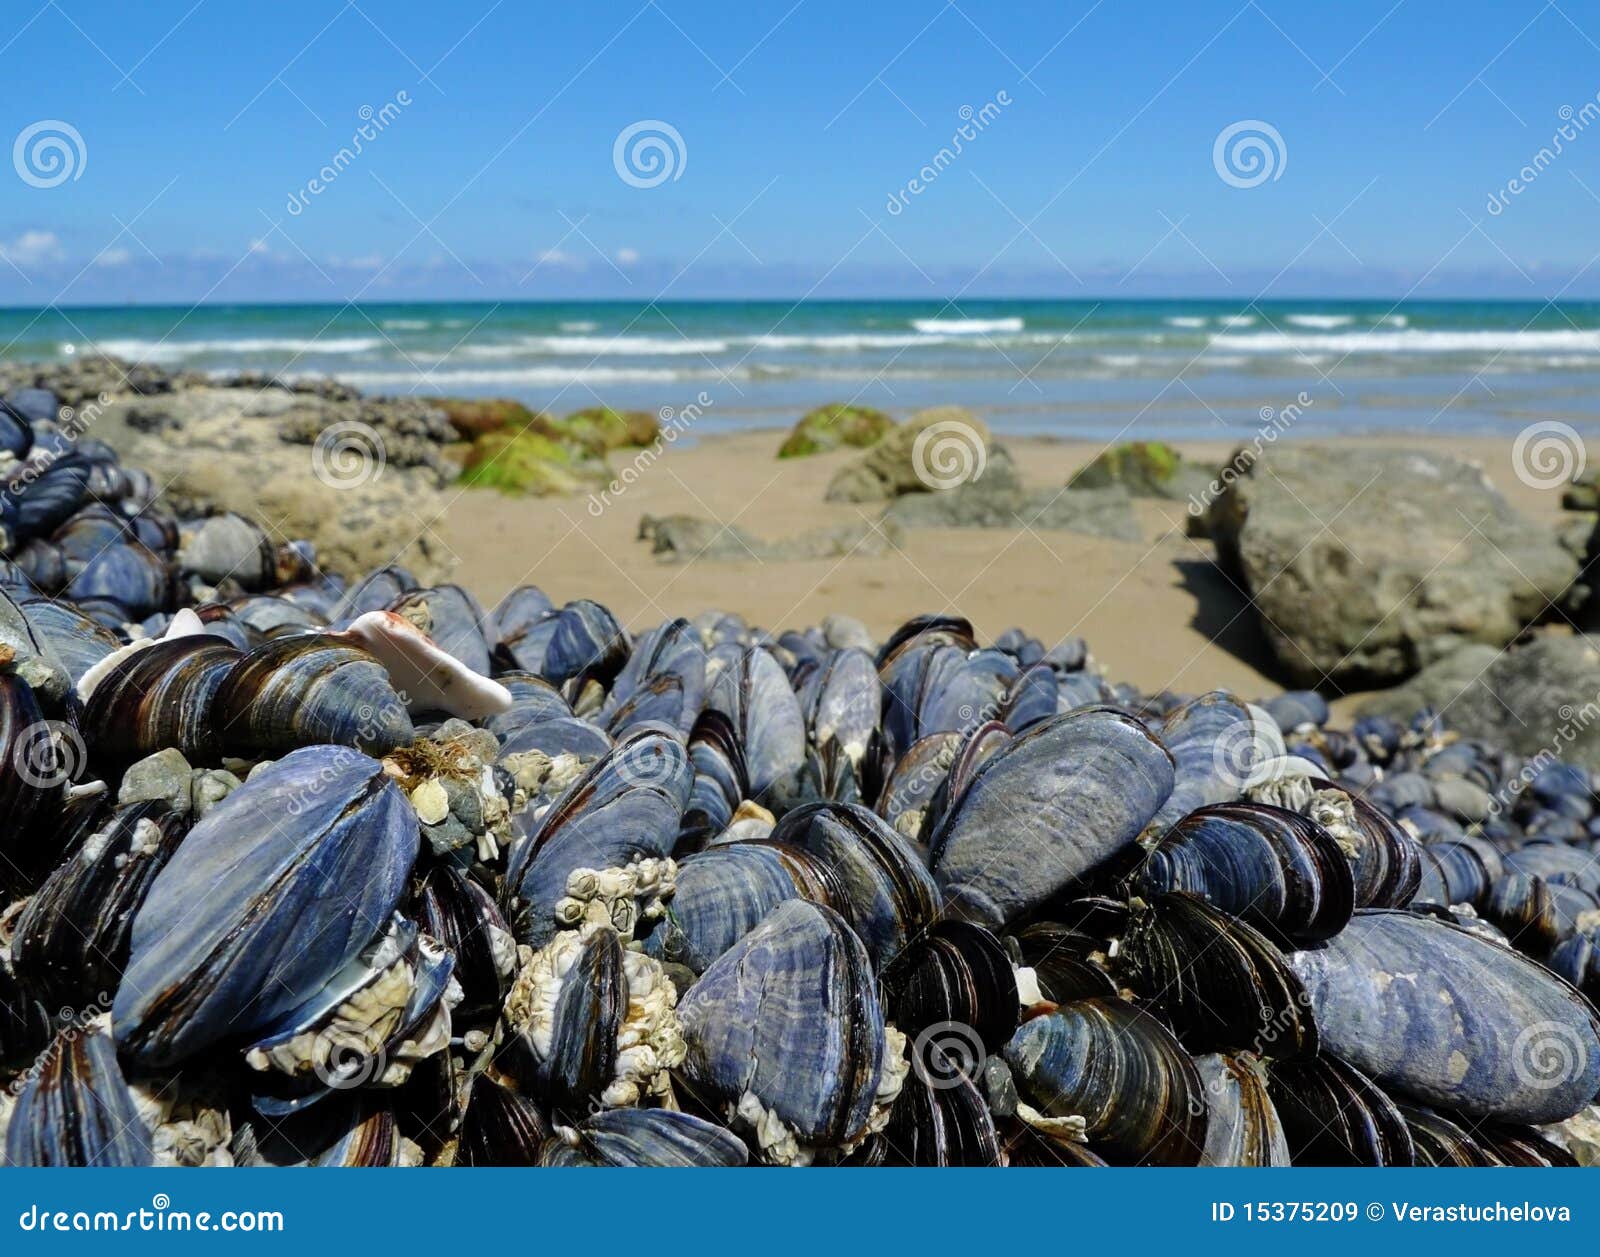 eatable mussels on a coast